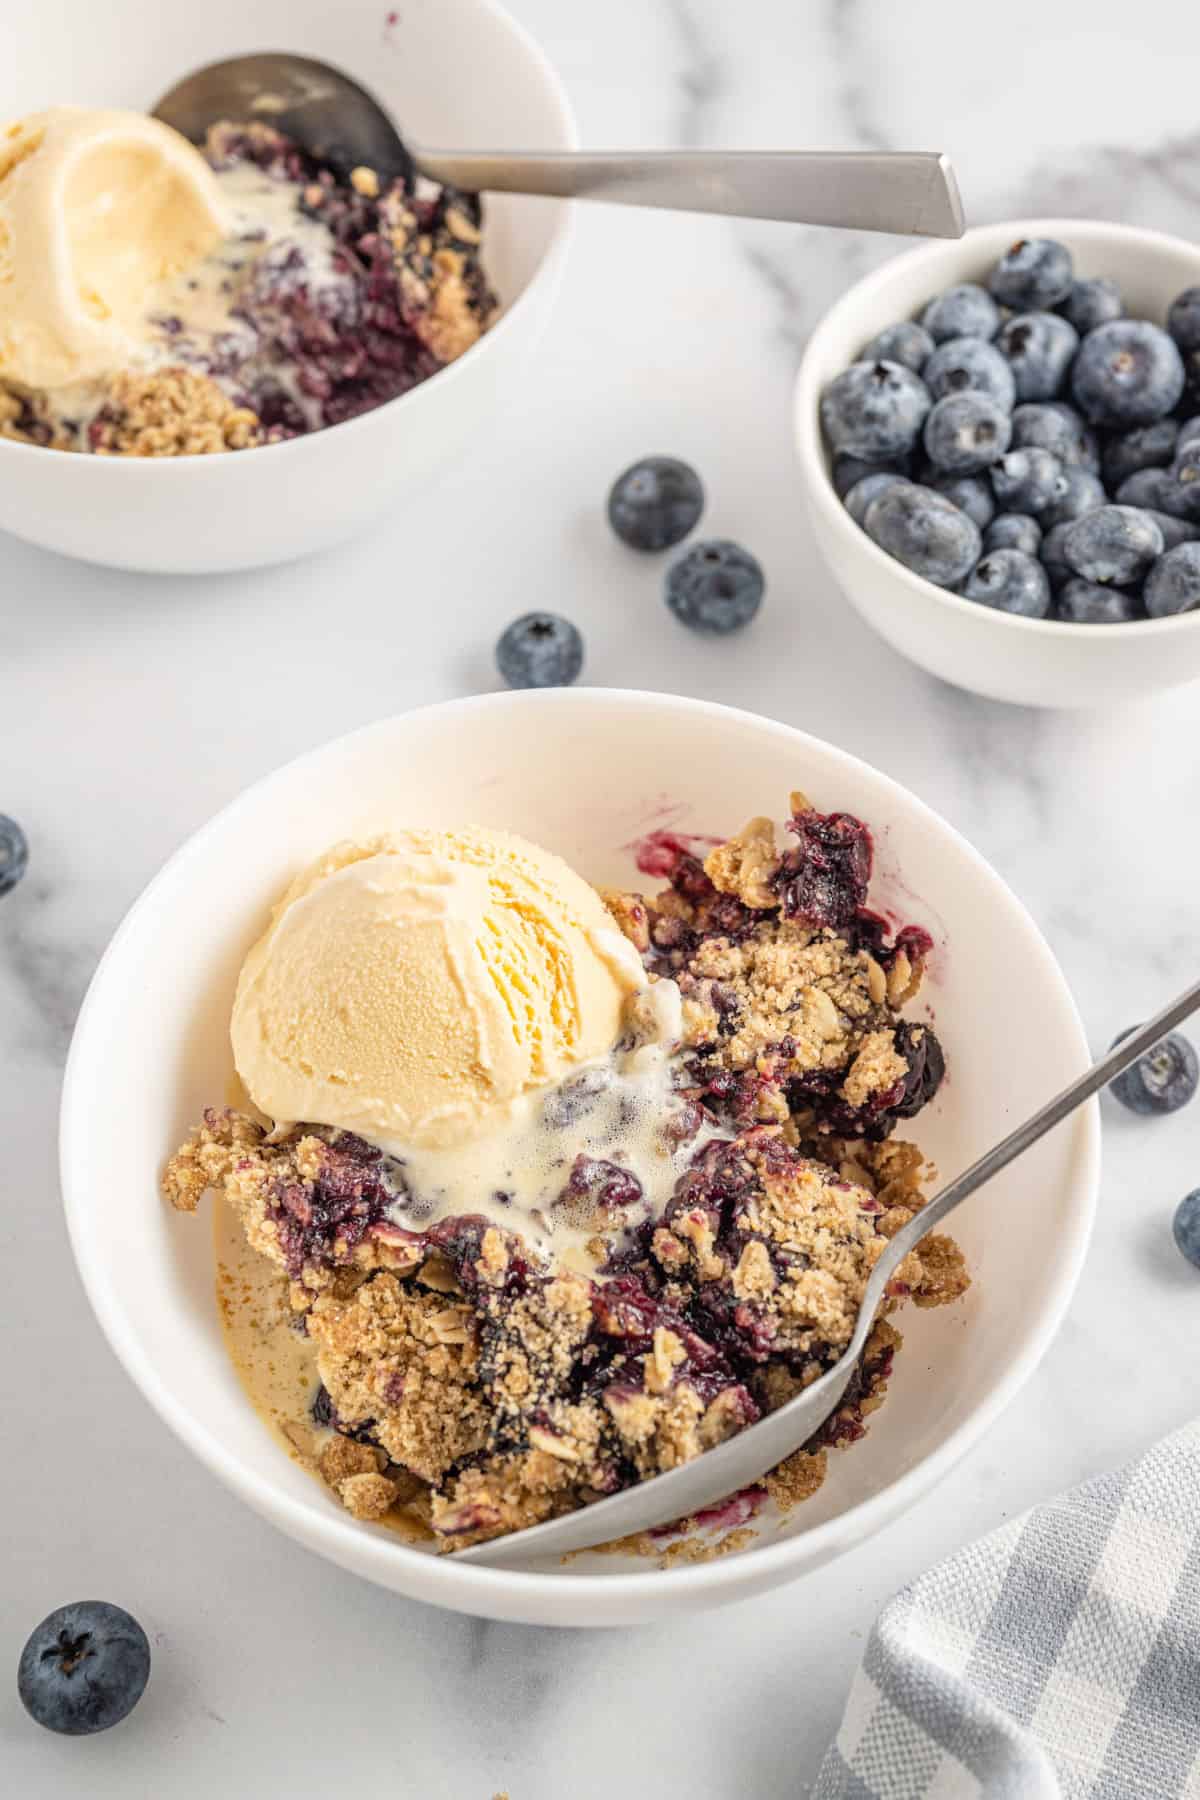 Blueberry crisp served in a white bowl with vanilla ice cream.